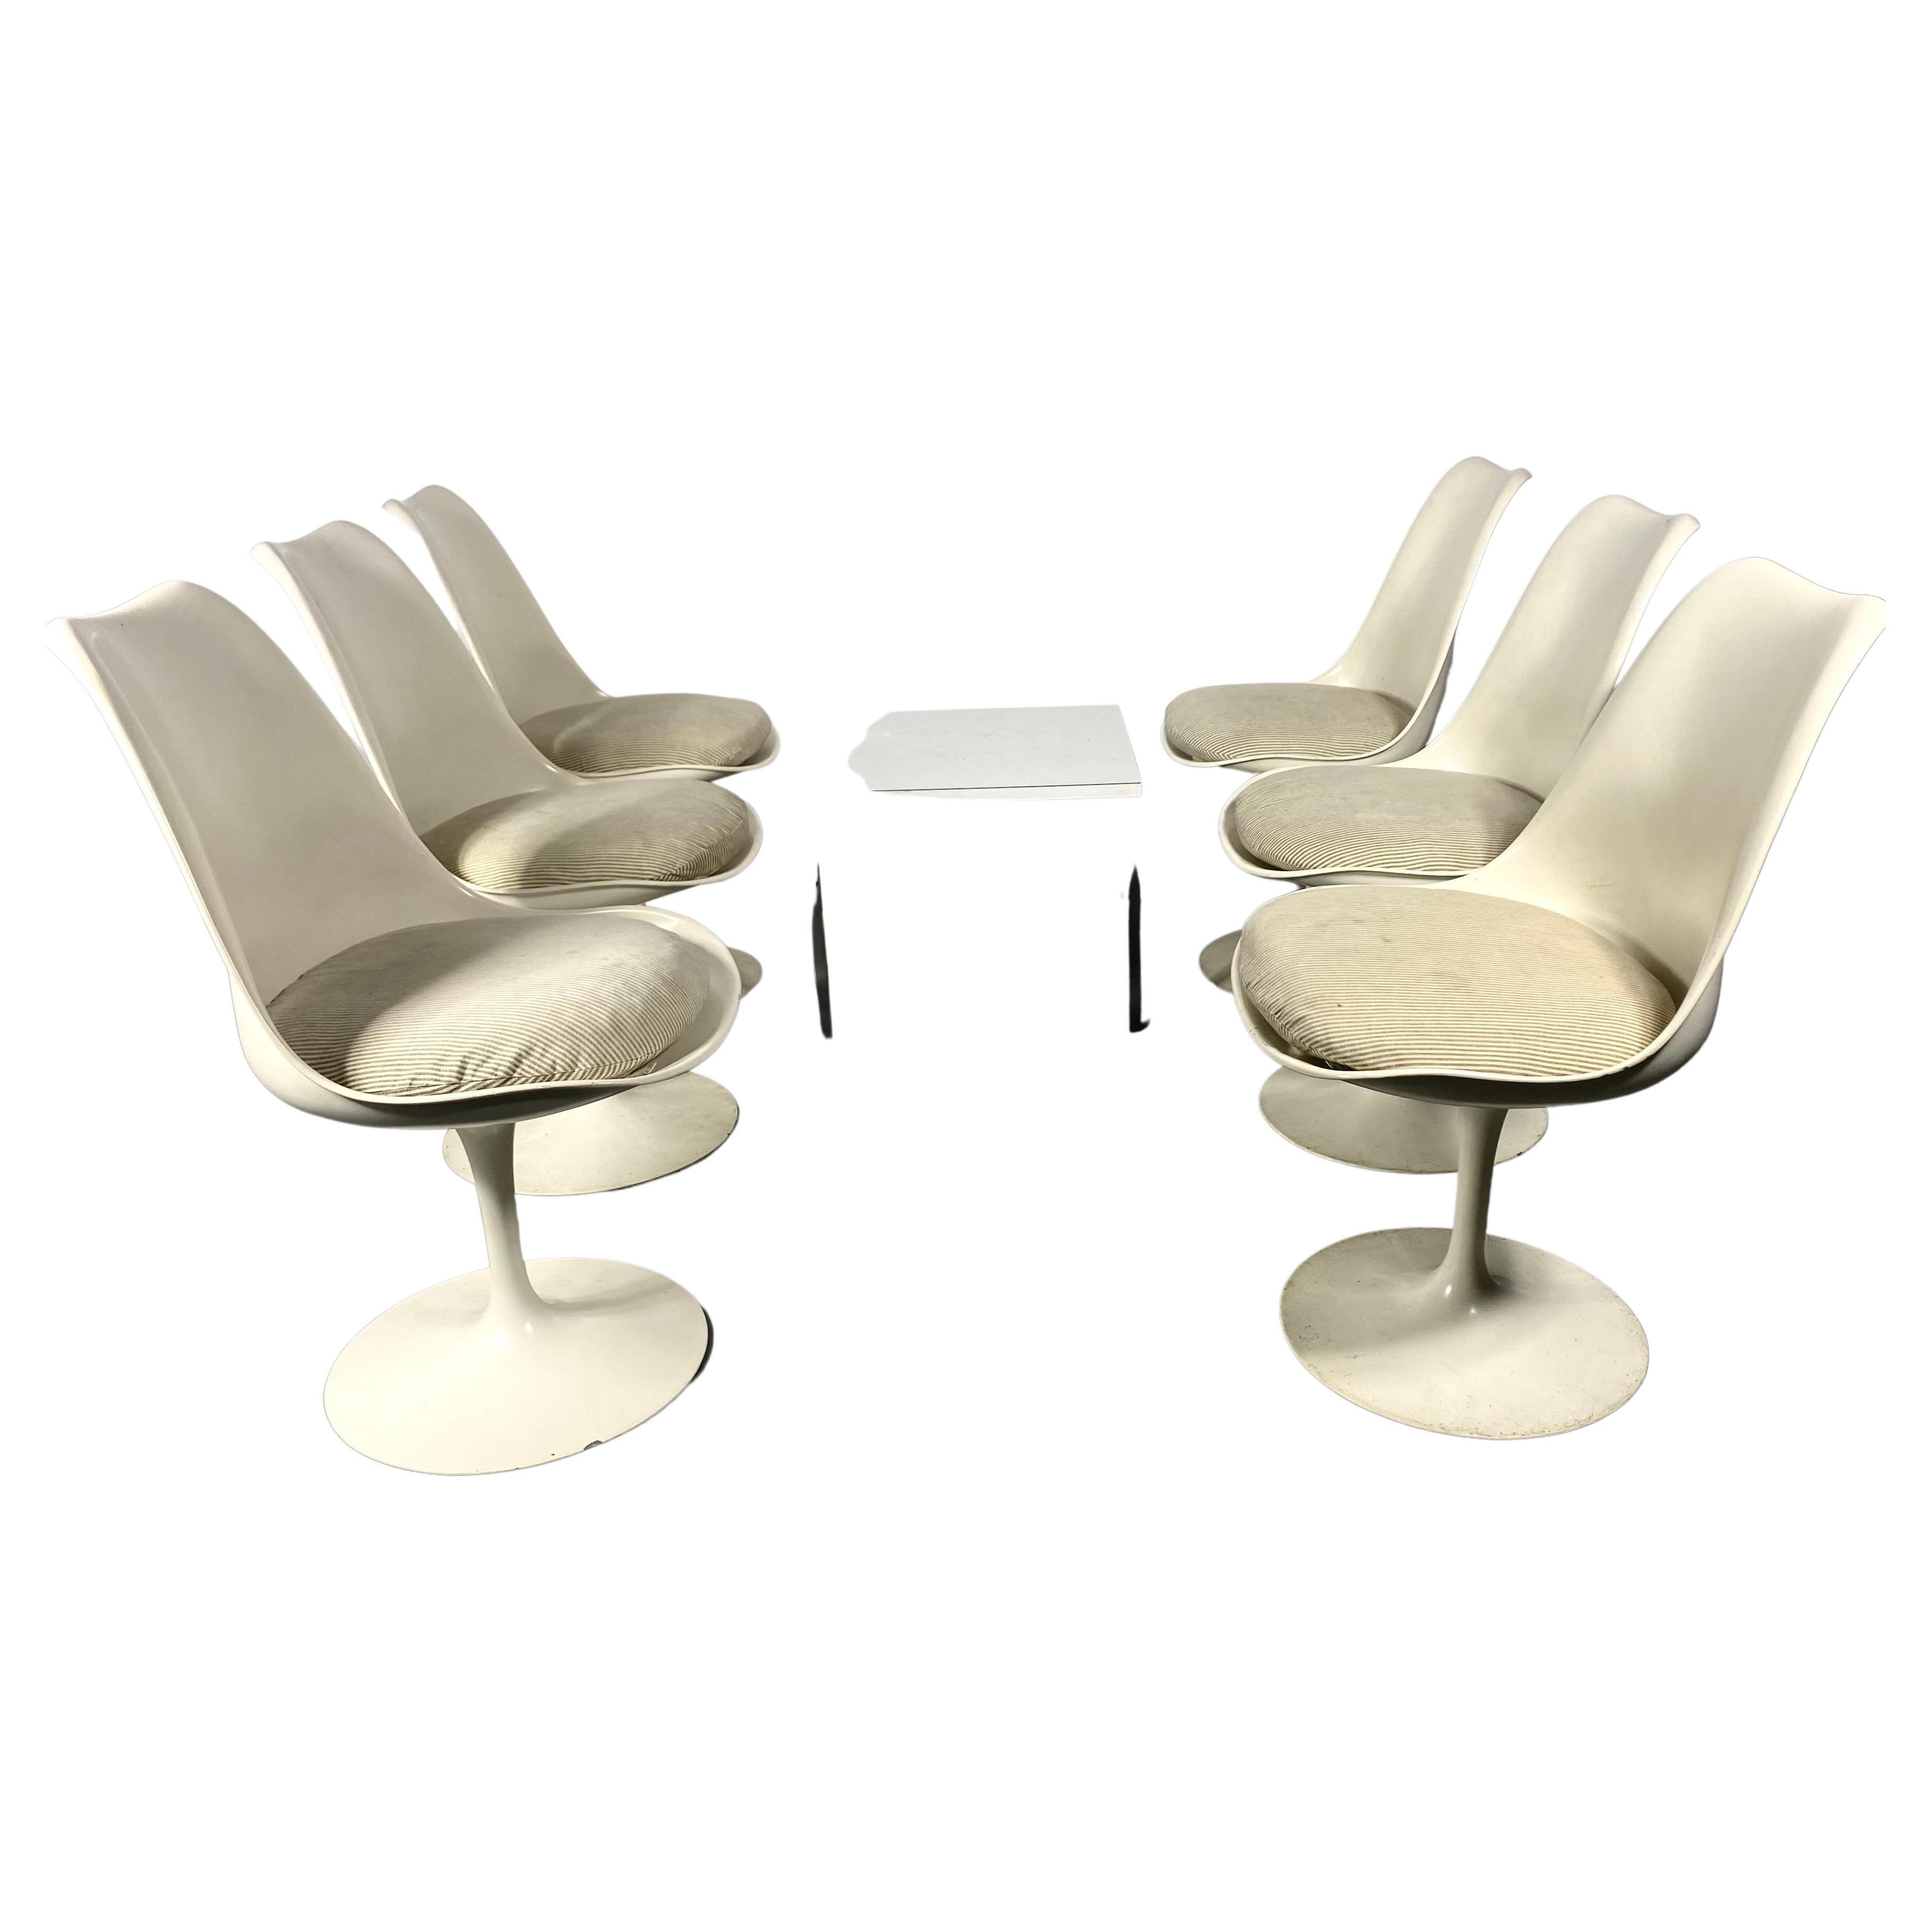 Early Production Eero Saarinen Tulip Dining Chairs Knoll, New York For Sale